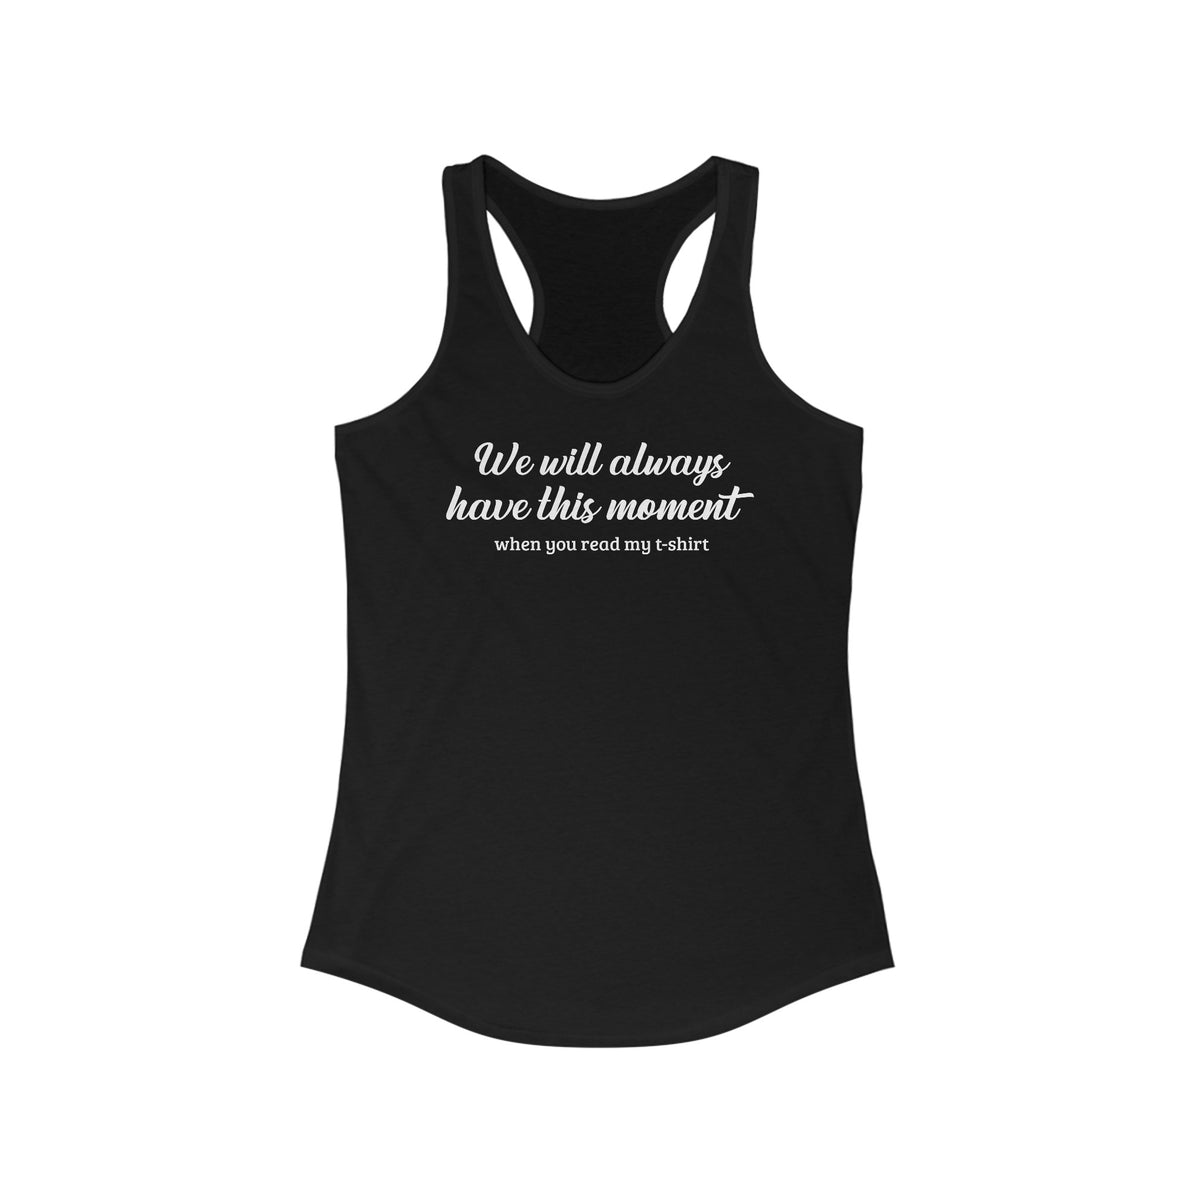 We Will Always Have This Moment - Women's Racerback Tank